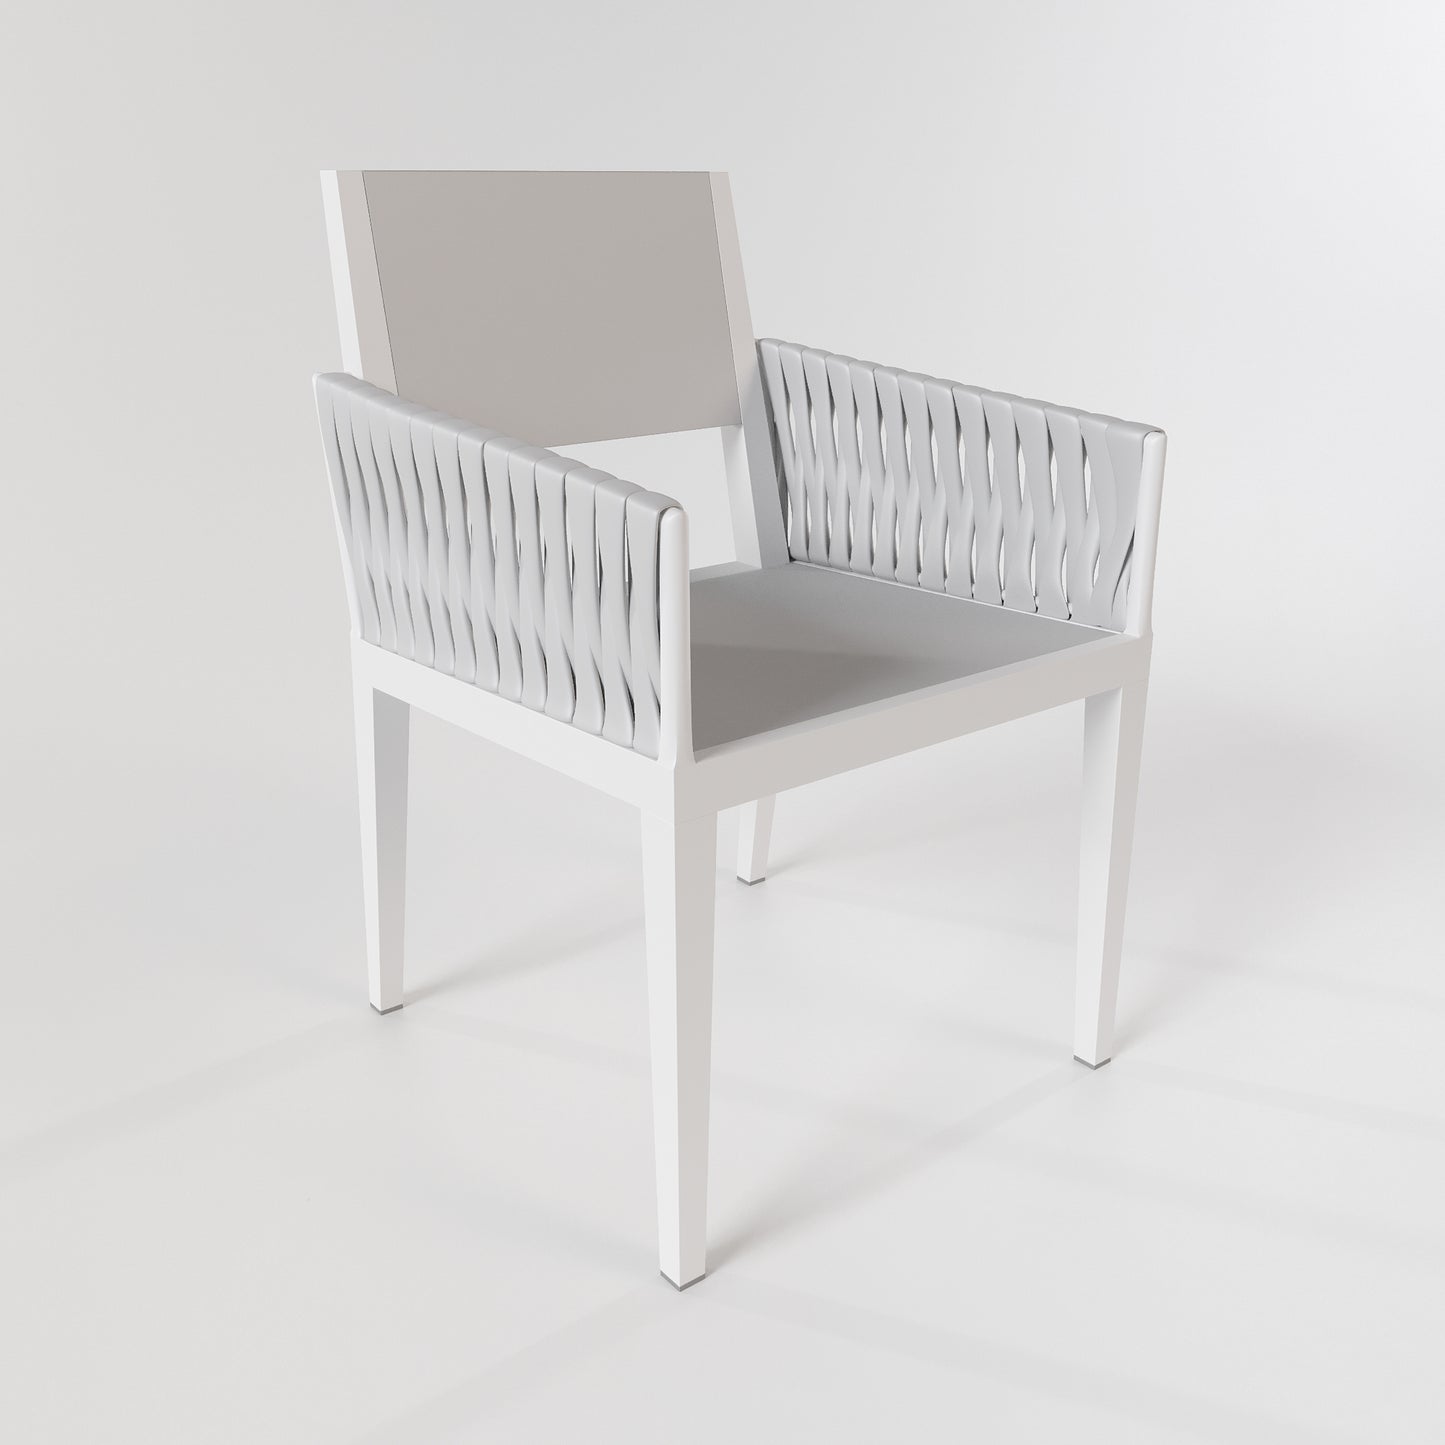 Biscayne Casual Sling Chair